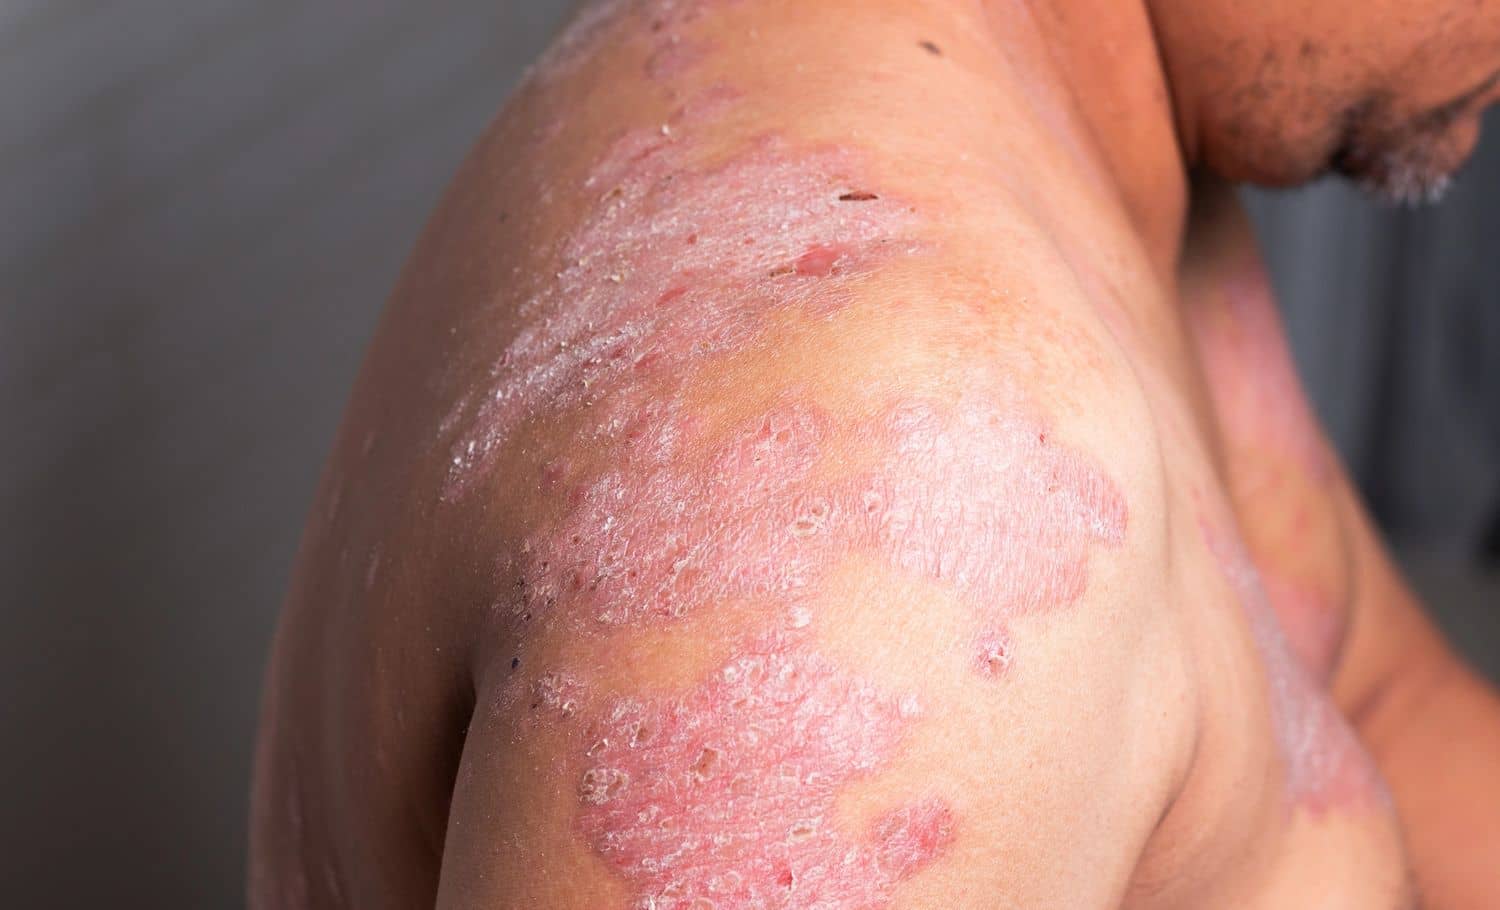 Why Is Psoriasis On The Rise?